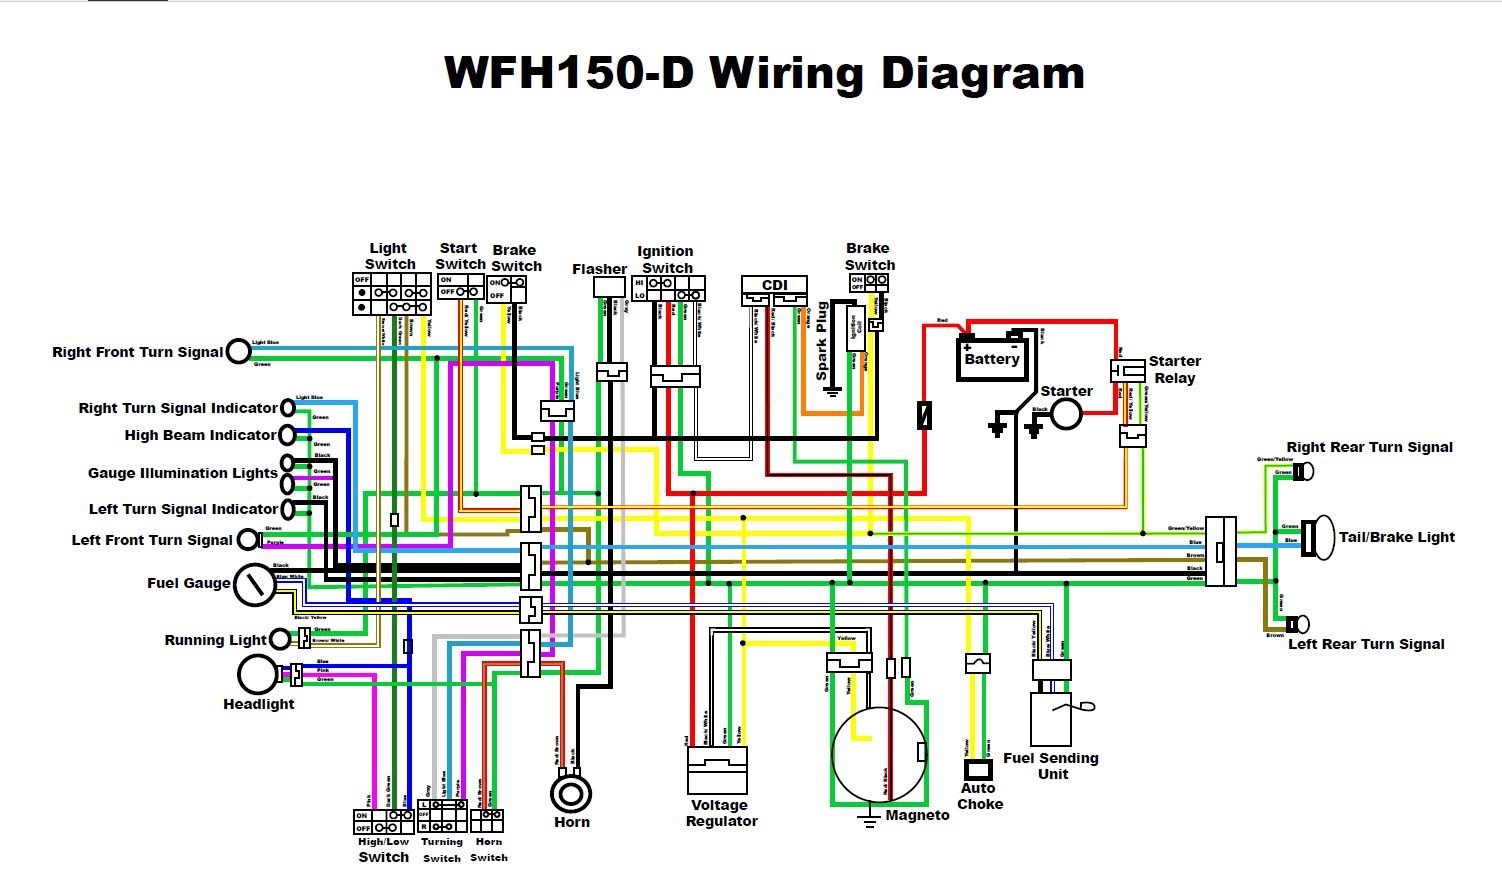 Wiring Diagram For 150cc Scooter With WHF150 D WIRING DIAGRAM JPG